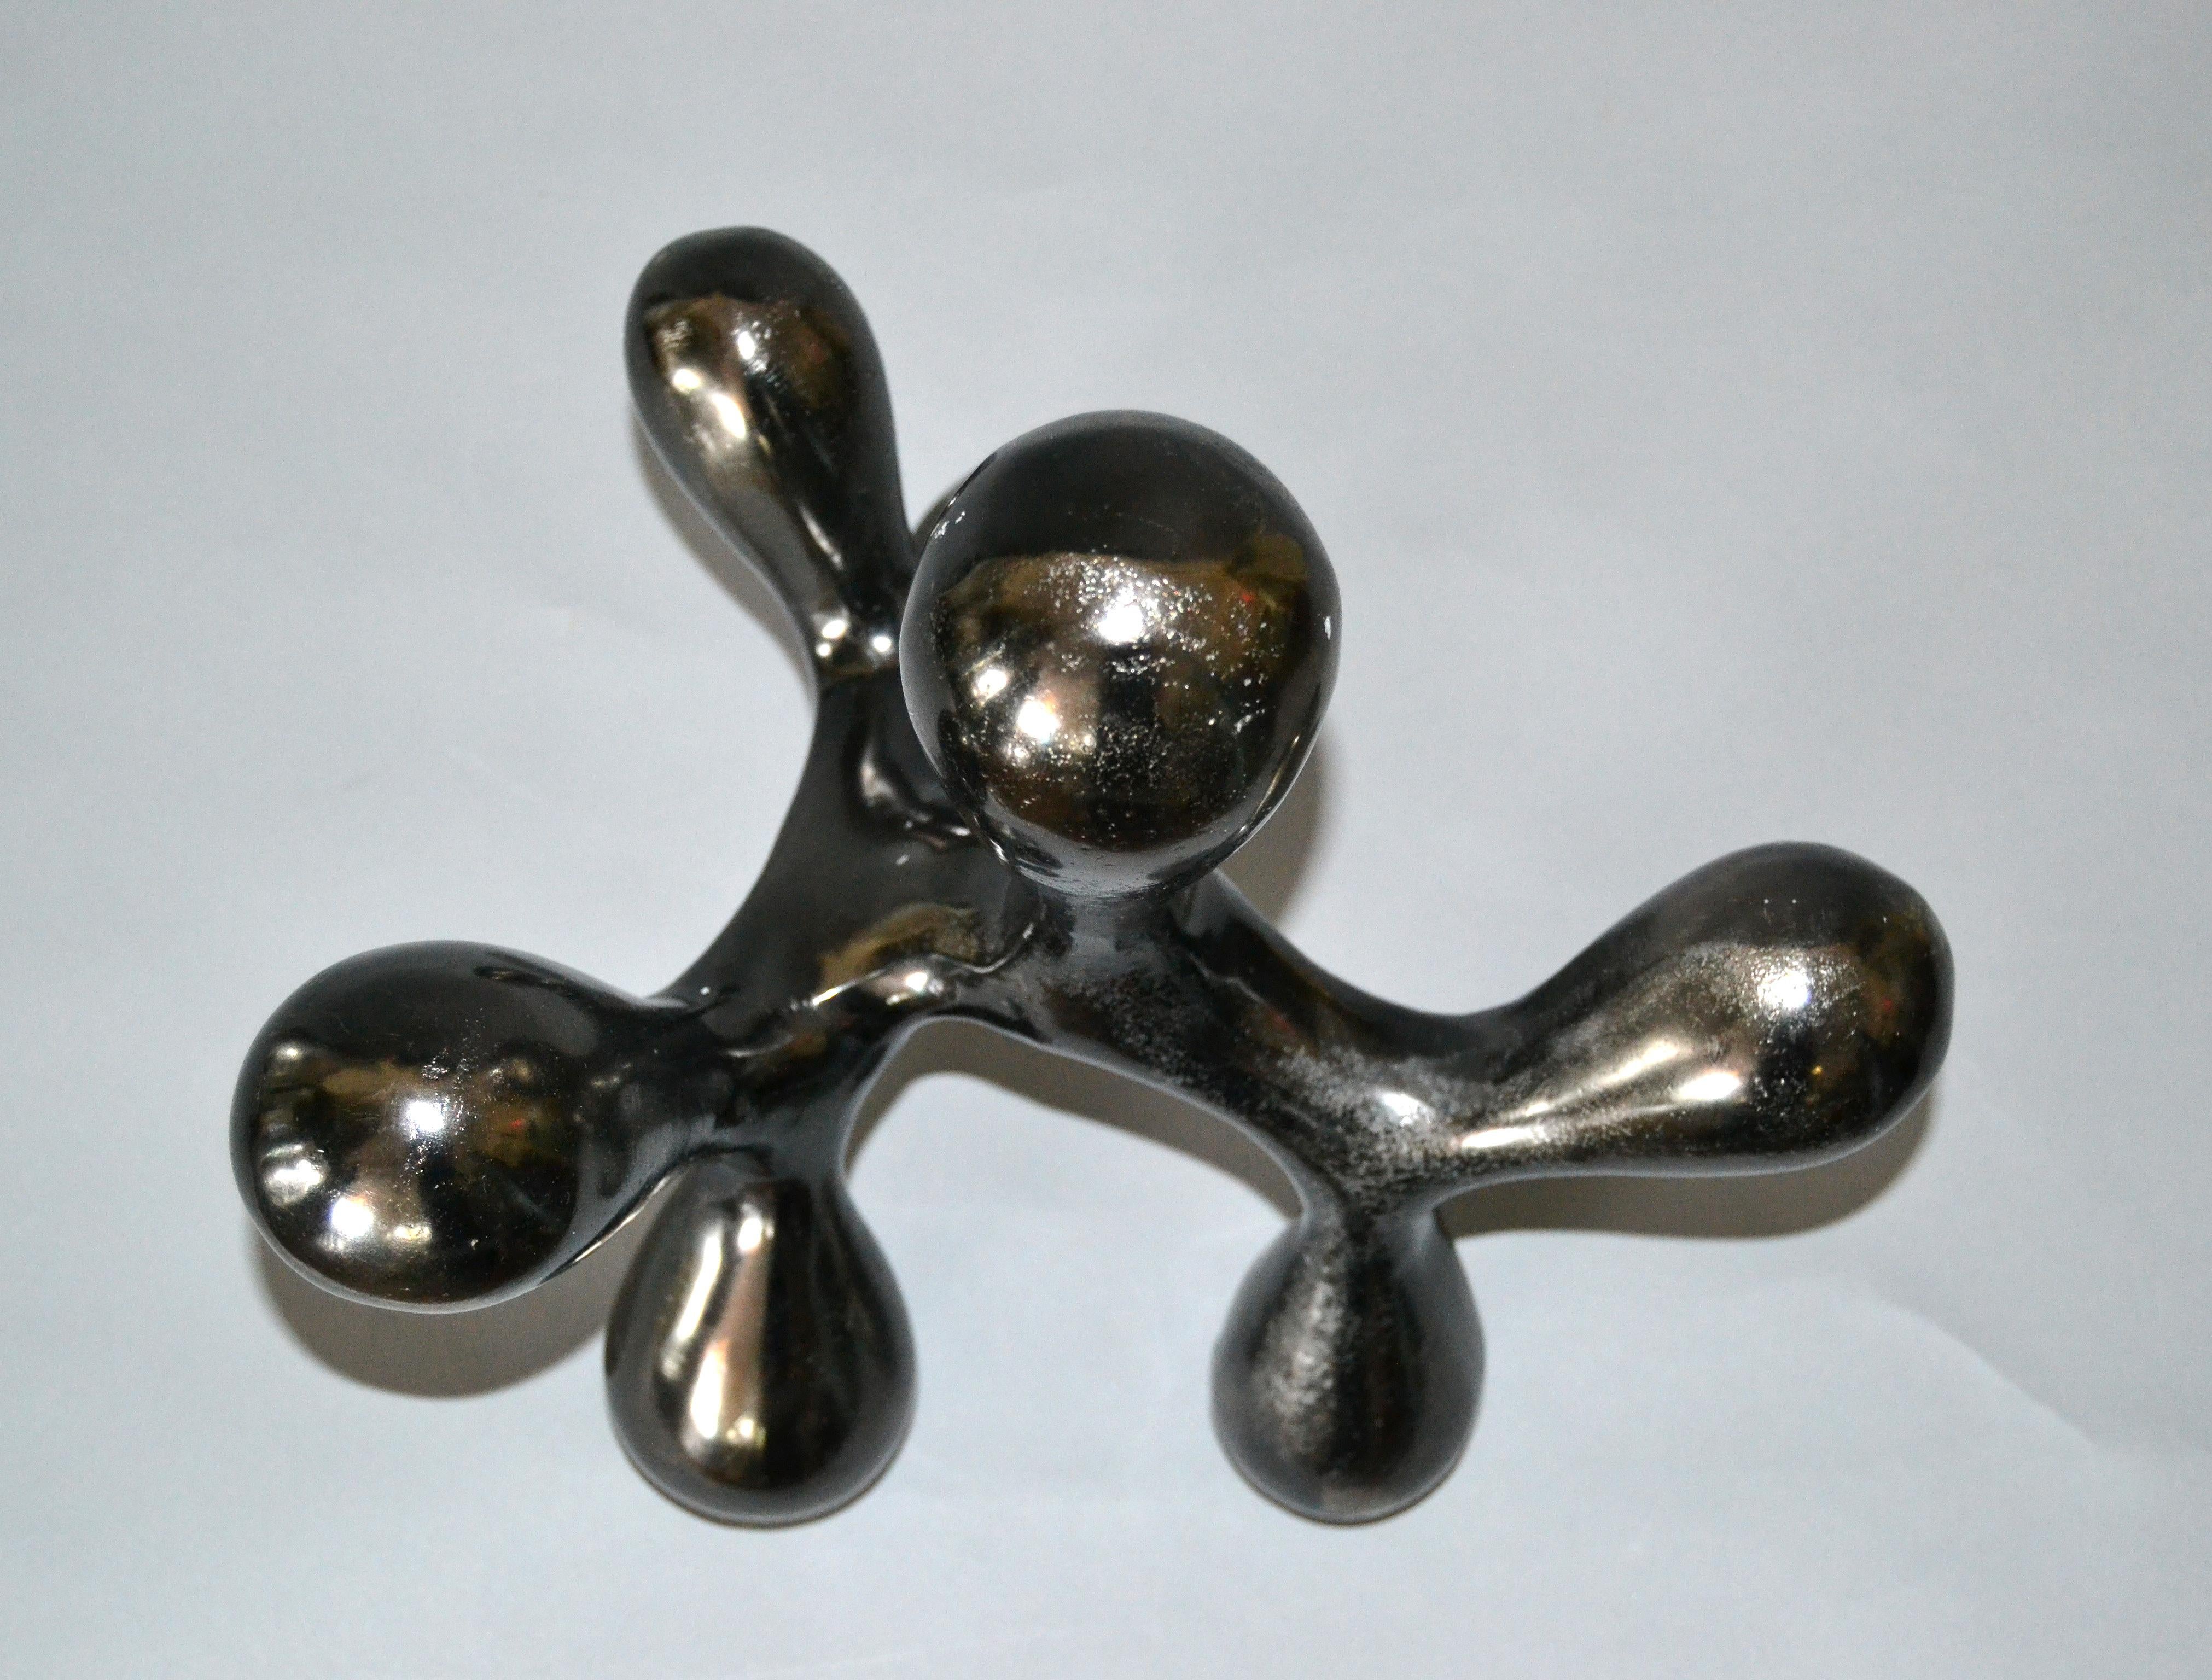 American Biomorphic Shape in Abstract Art Bronze Table Sculpture